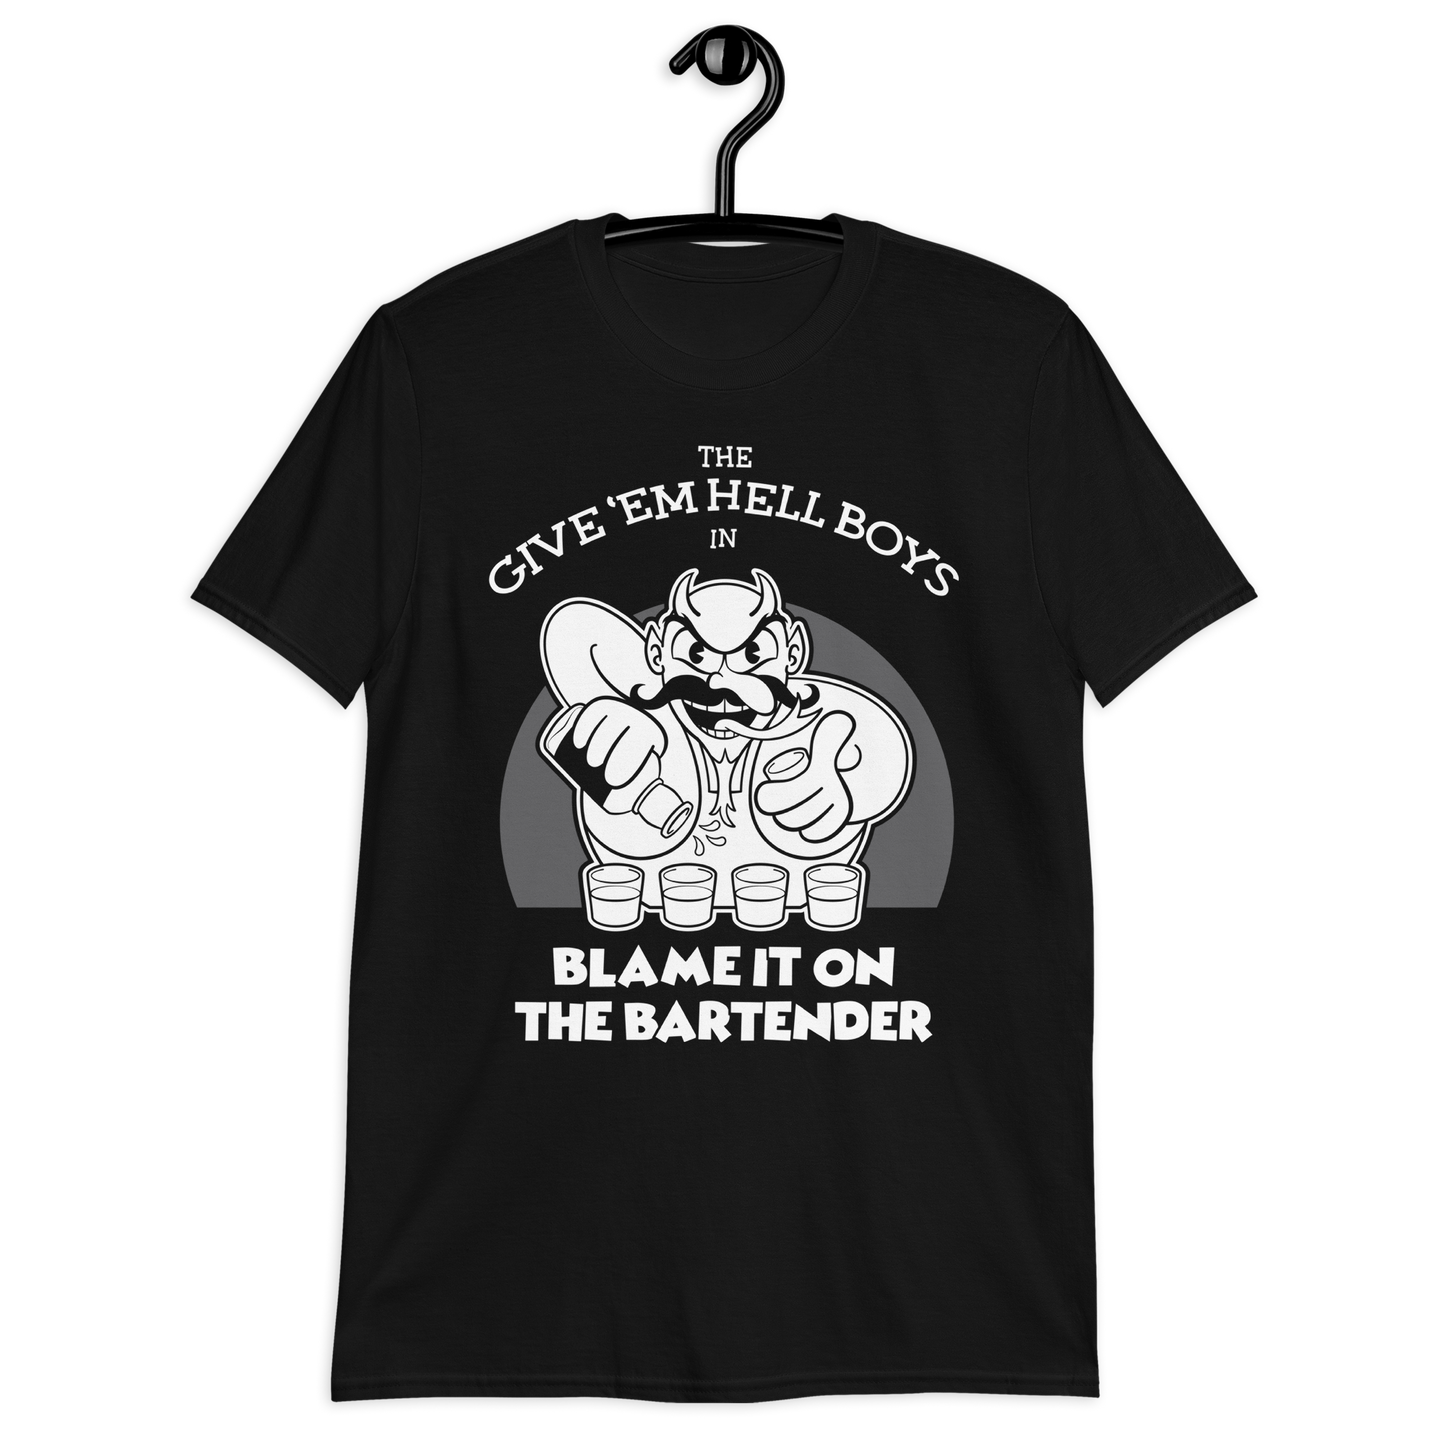 Blame It On The Bartender T-Shirt